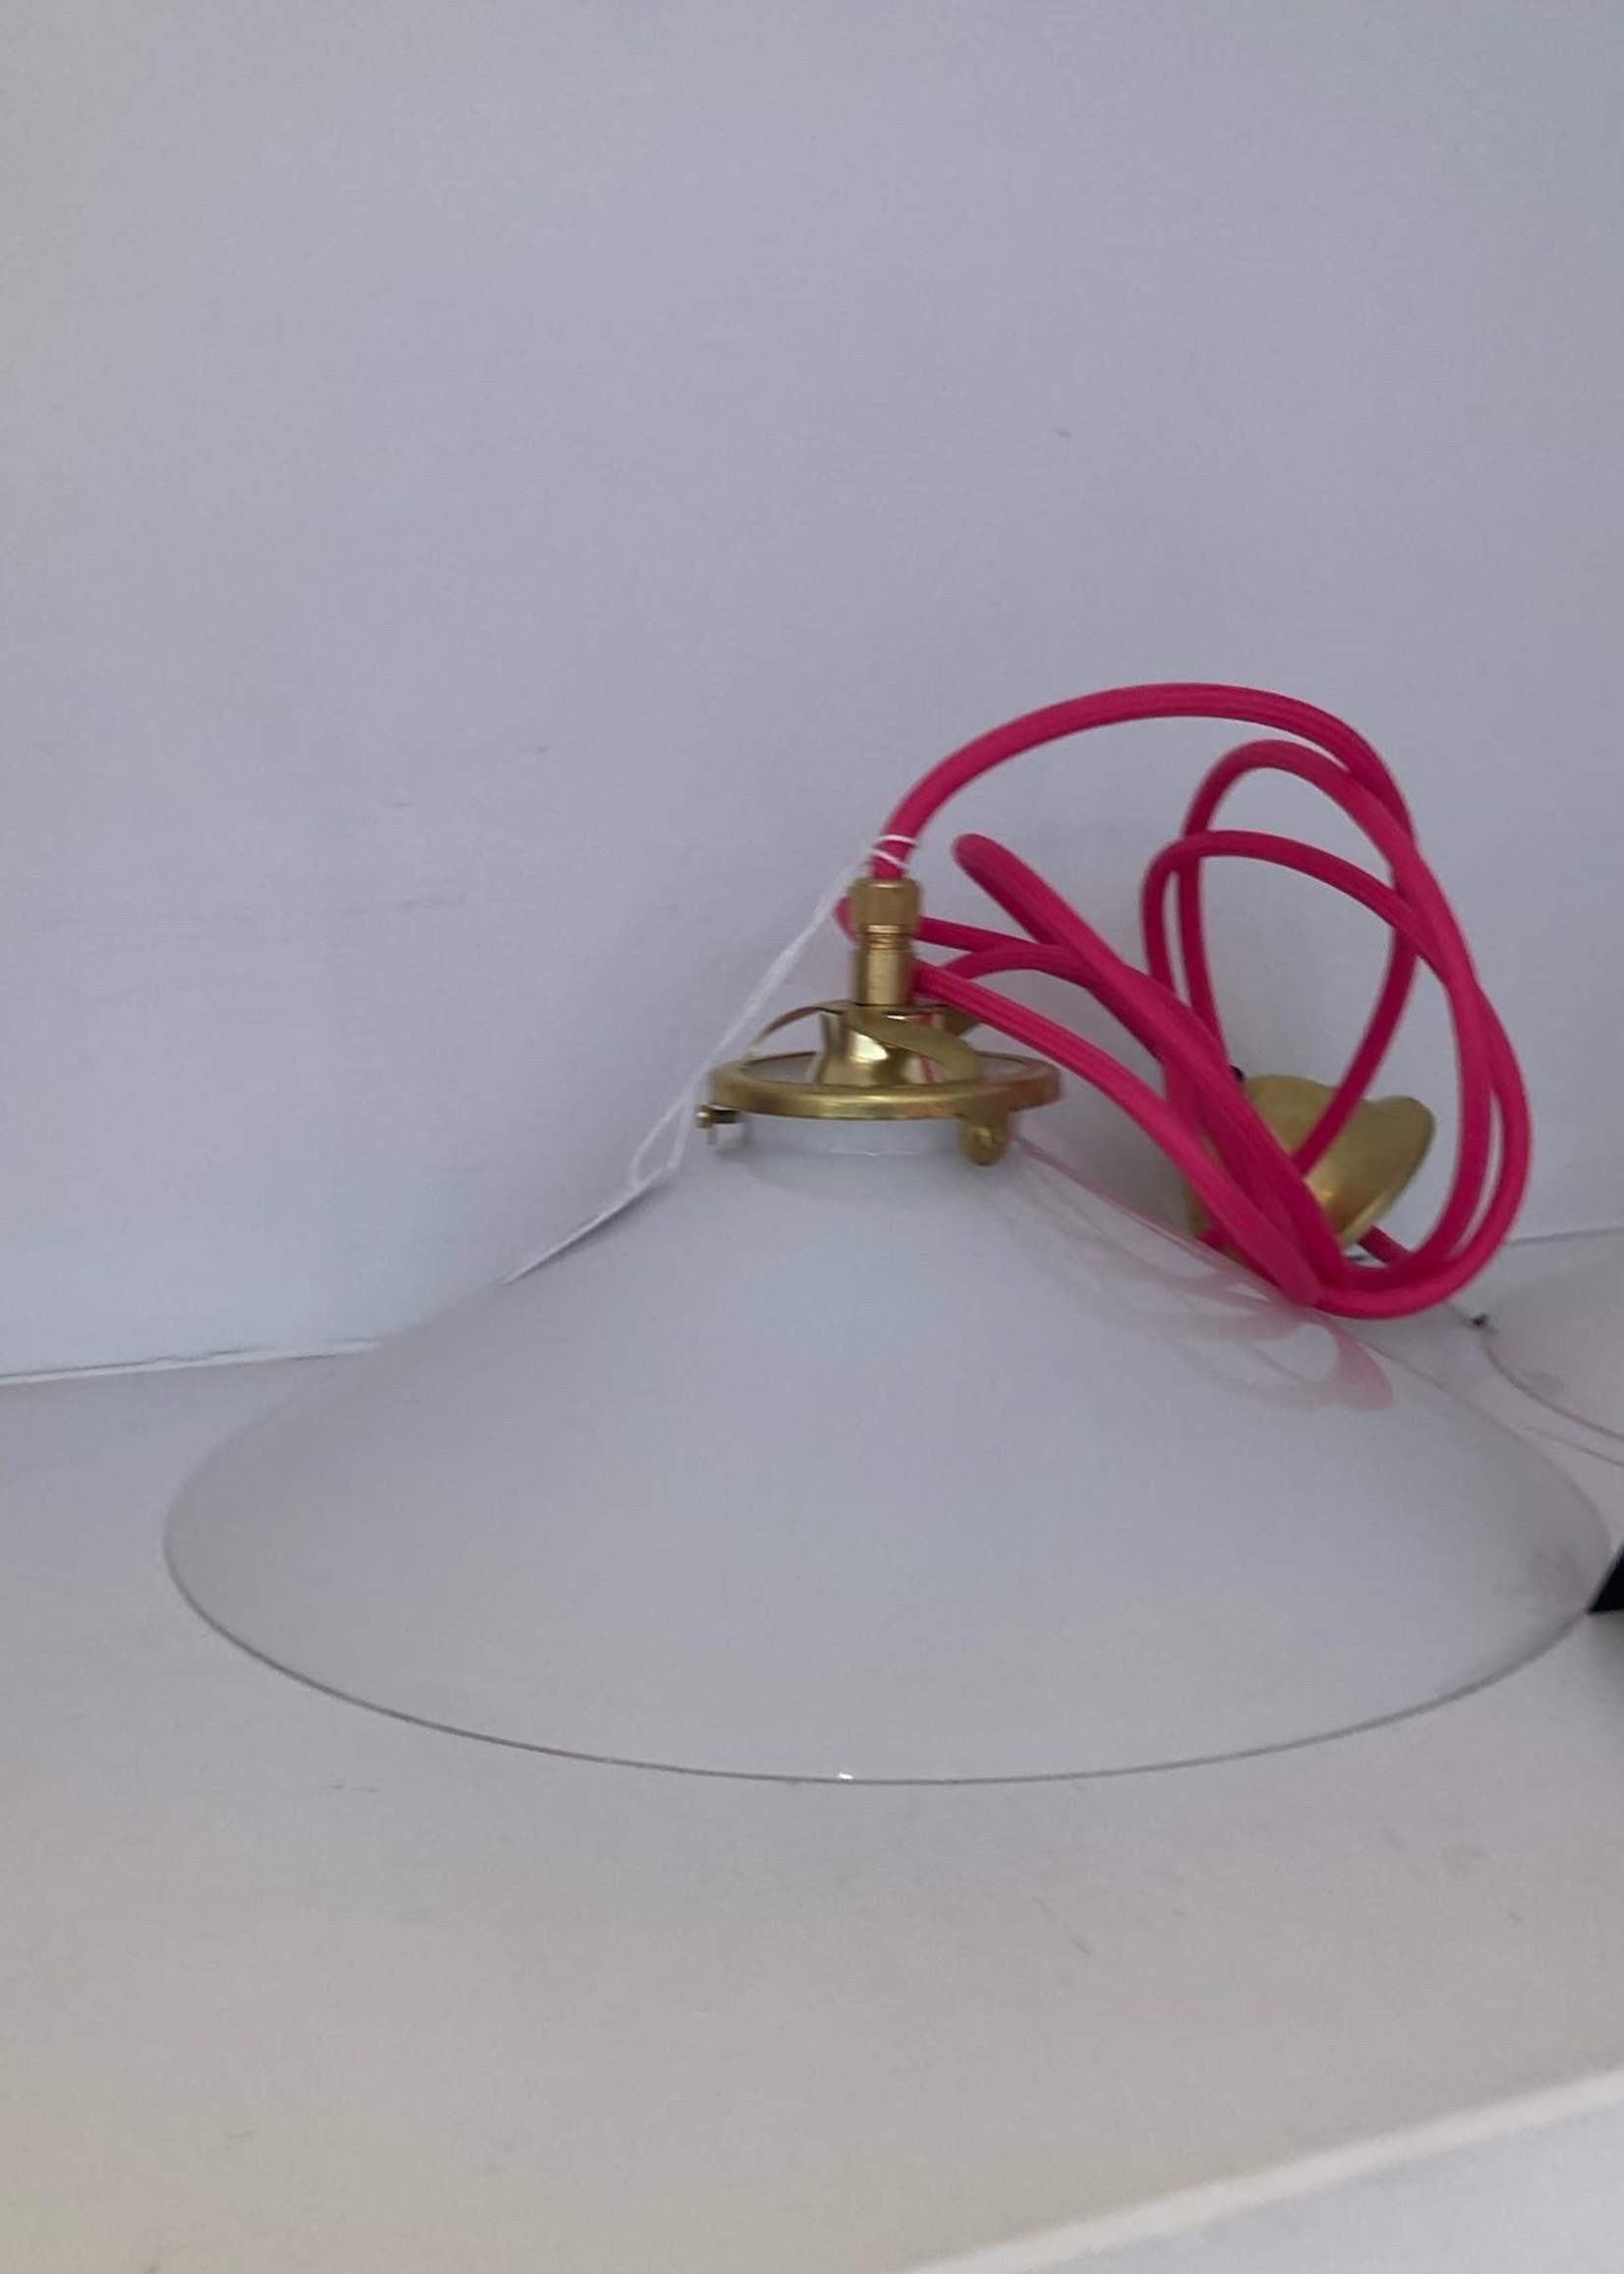 Suspension lamp, Fucshia cord, golden socket E27 with glass holder, Brass ceiling rose